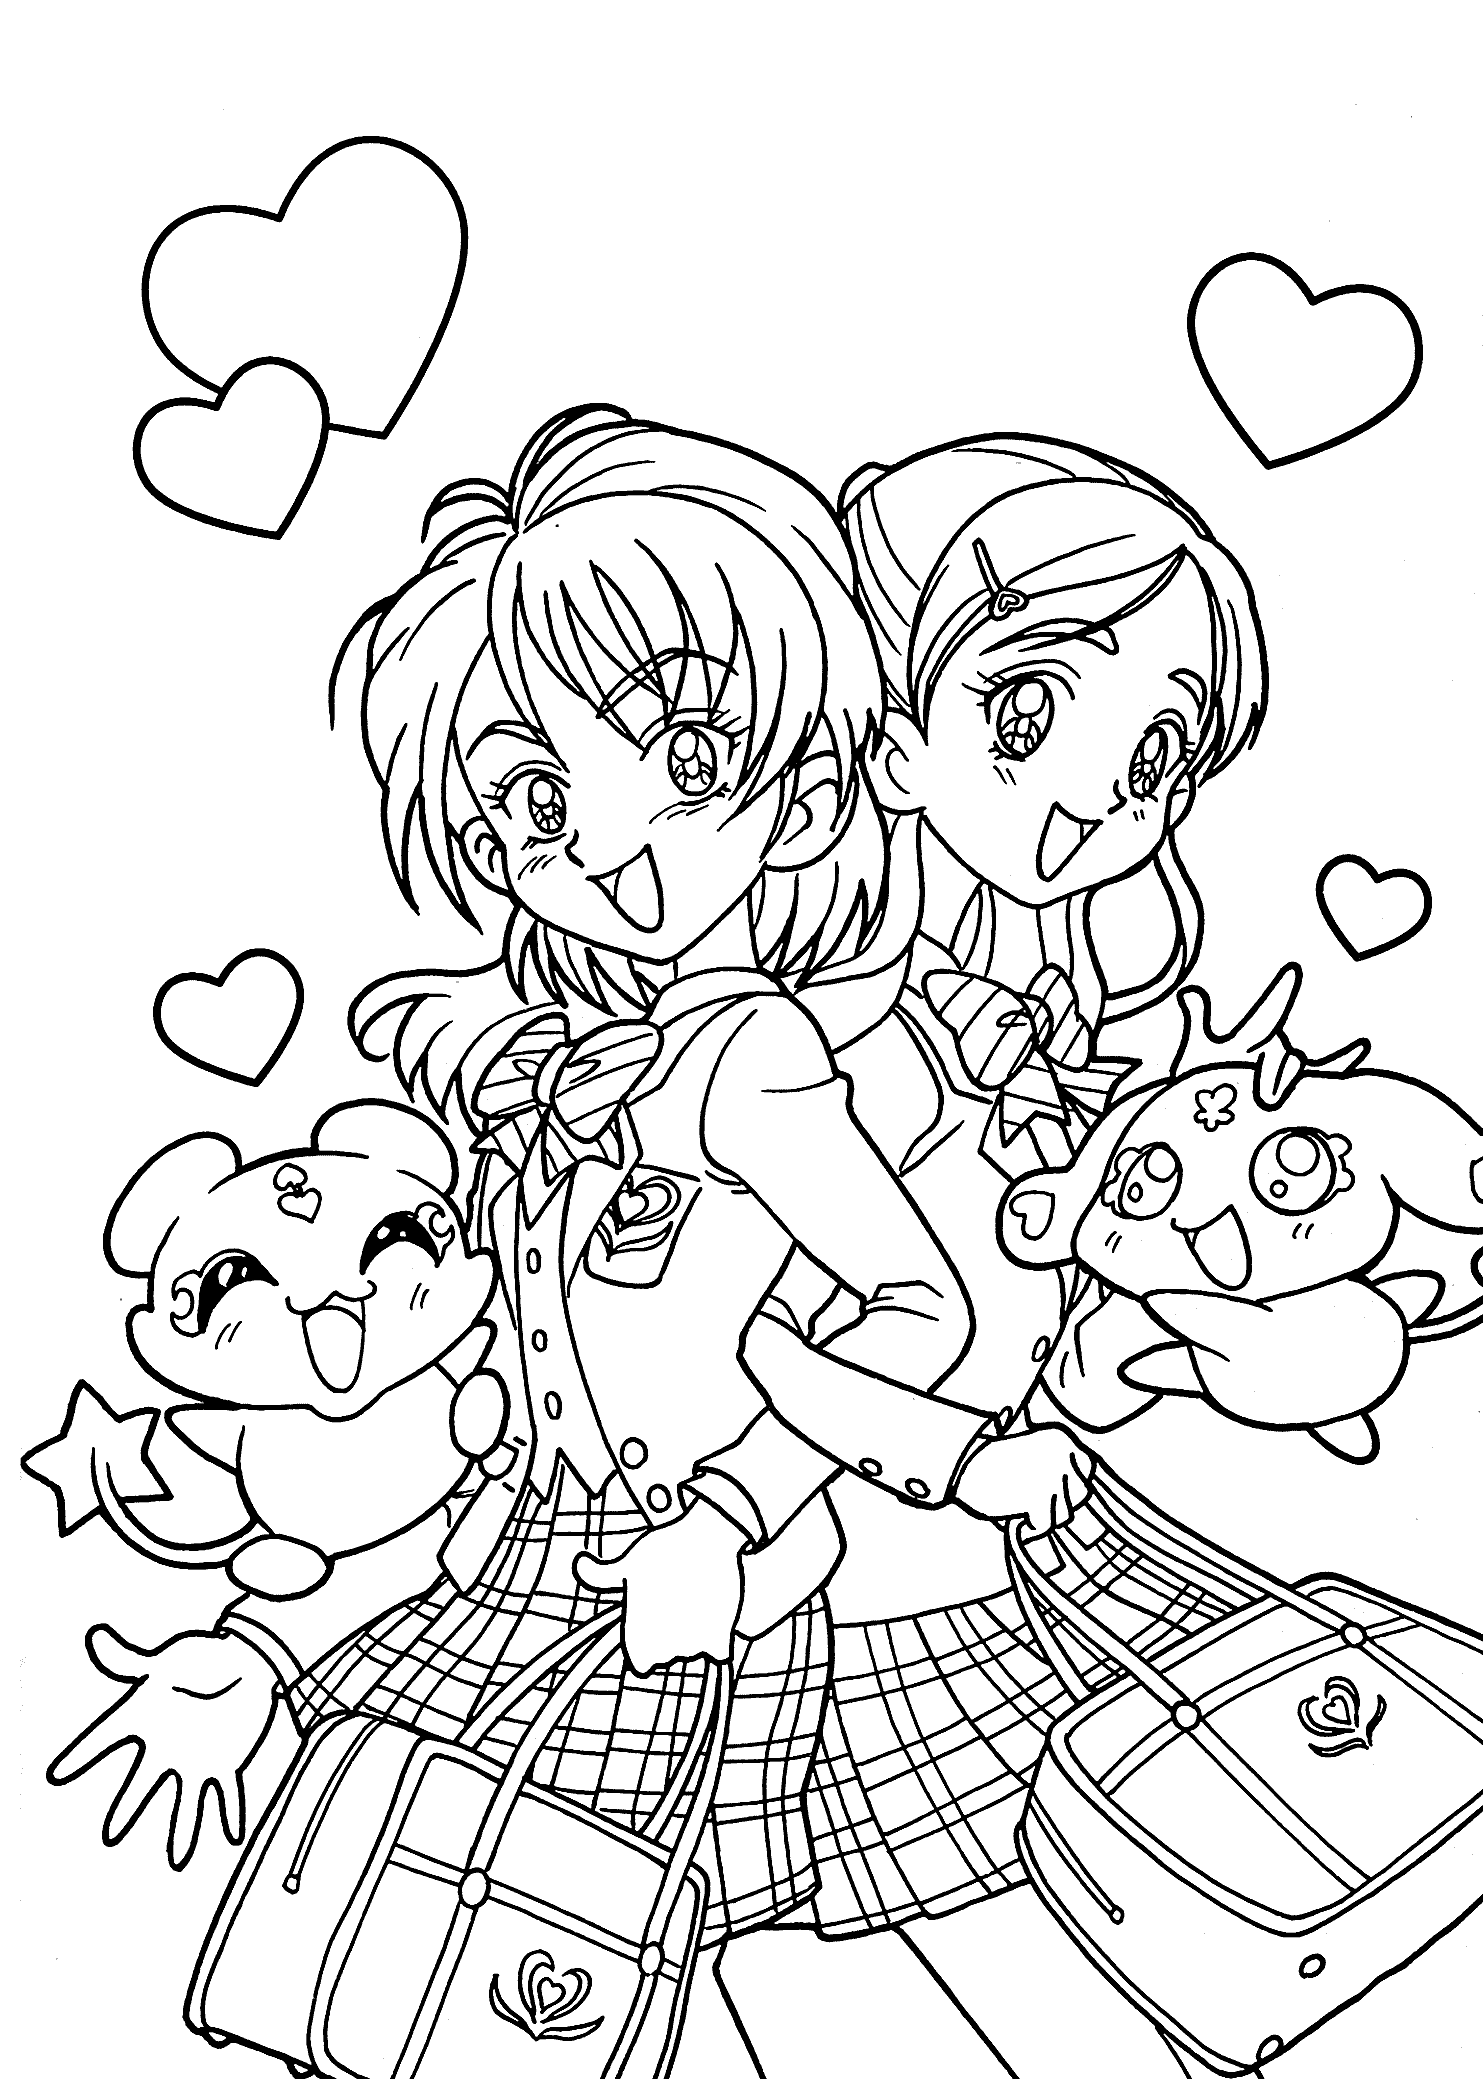 anime pictures to color anime coloring pages best coloring pages for kids pictures to anime color 